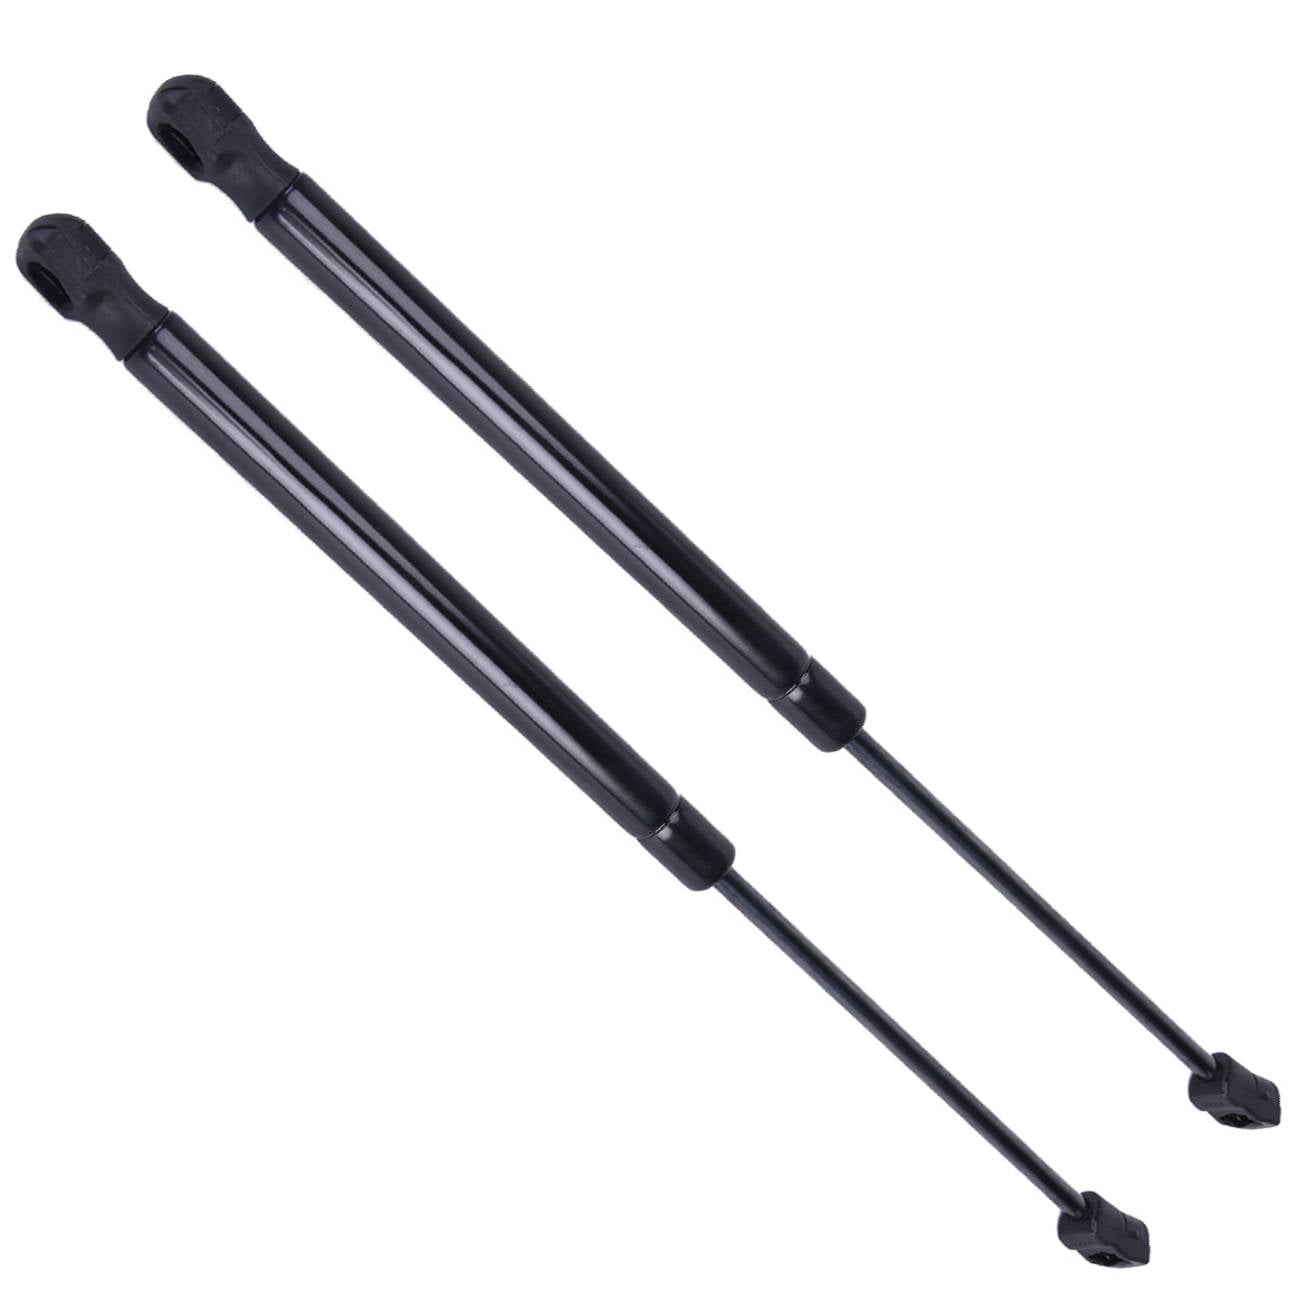 AUTOMUTO 6351 PM3188 SG326009 Lift Supports Gas Struts Shocks Springs Replacement Fit 2004-2008 Acura TL Front Hood